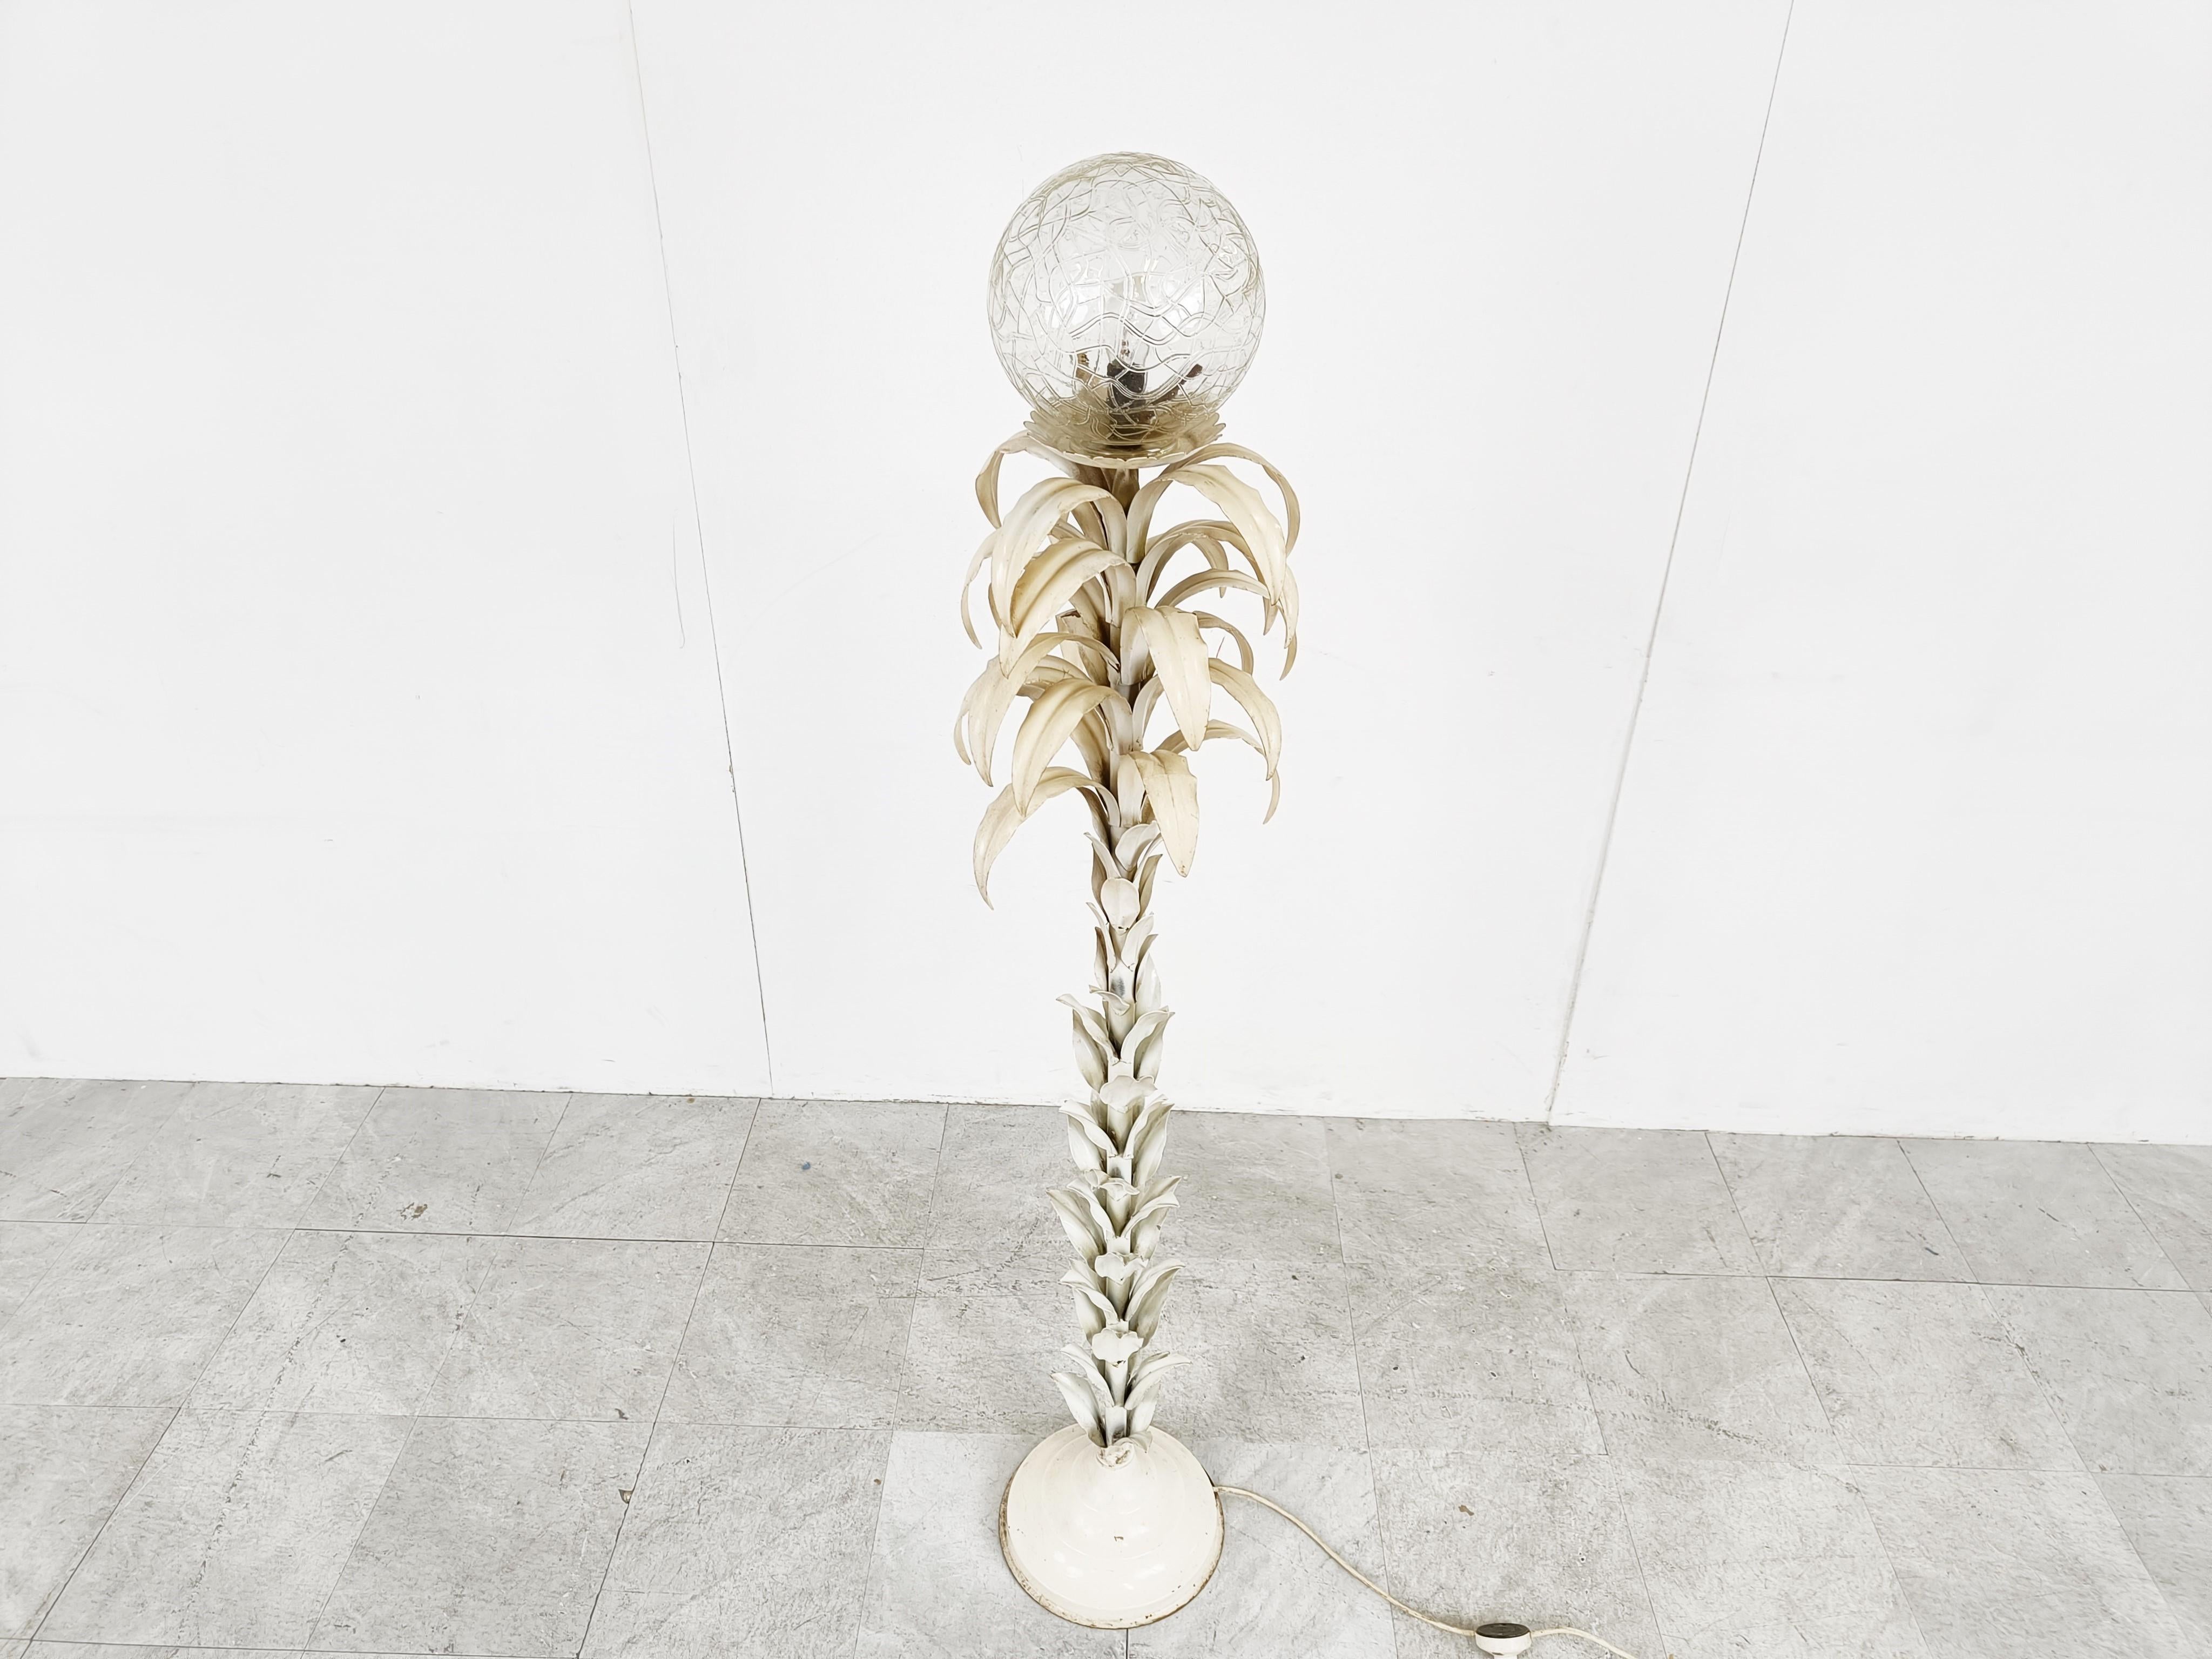 Mid century floral floor lamp with a beautiful amber coloured hand made glass globe.

White lacquered metal leafs.

The floor lamp emits an amazing light.

Original condition with some paint loss adding to the charm.

Comes with a foot